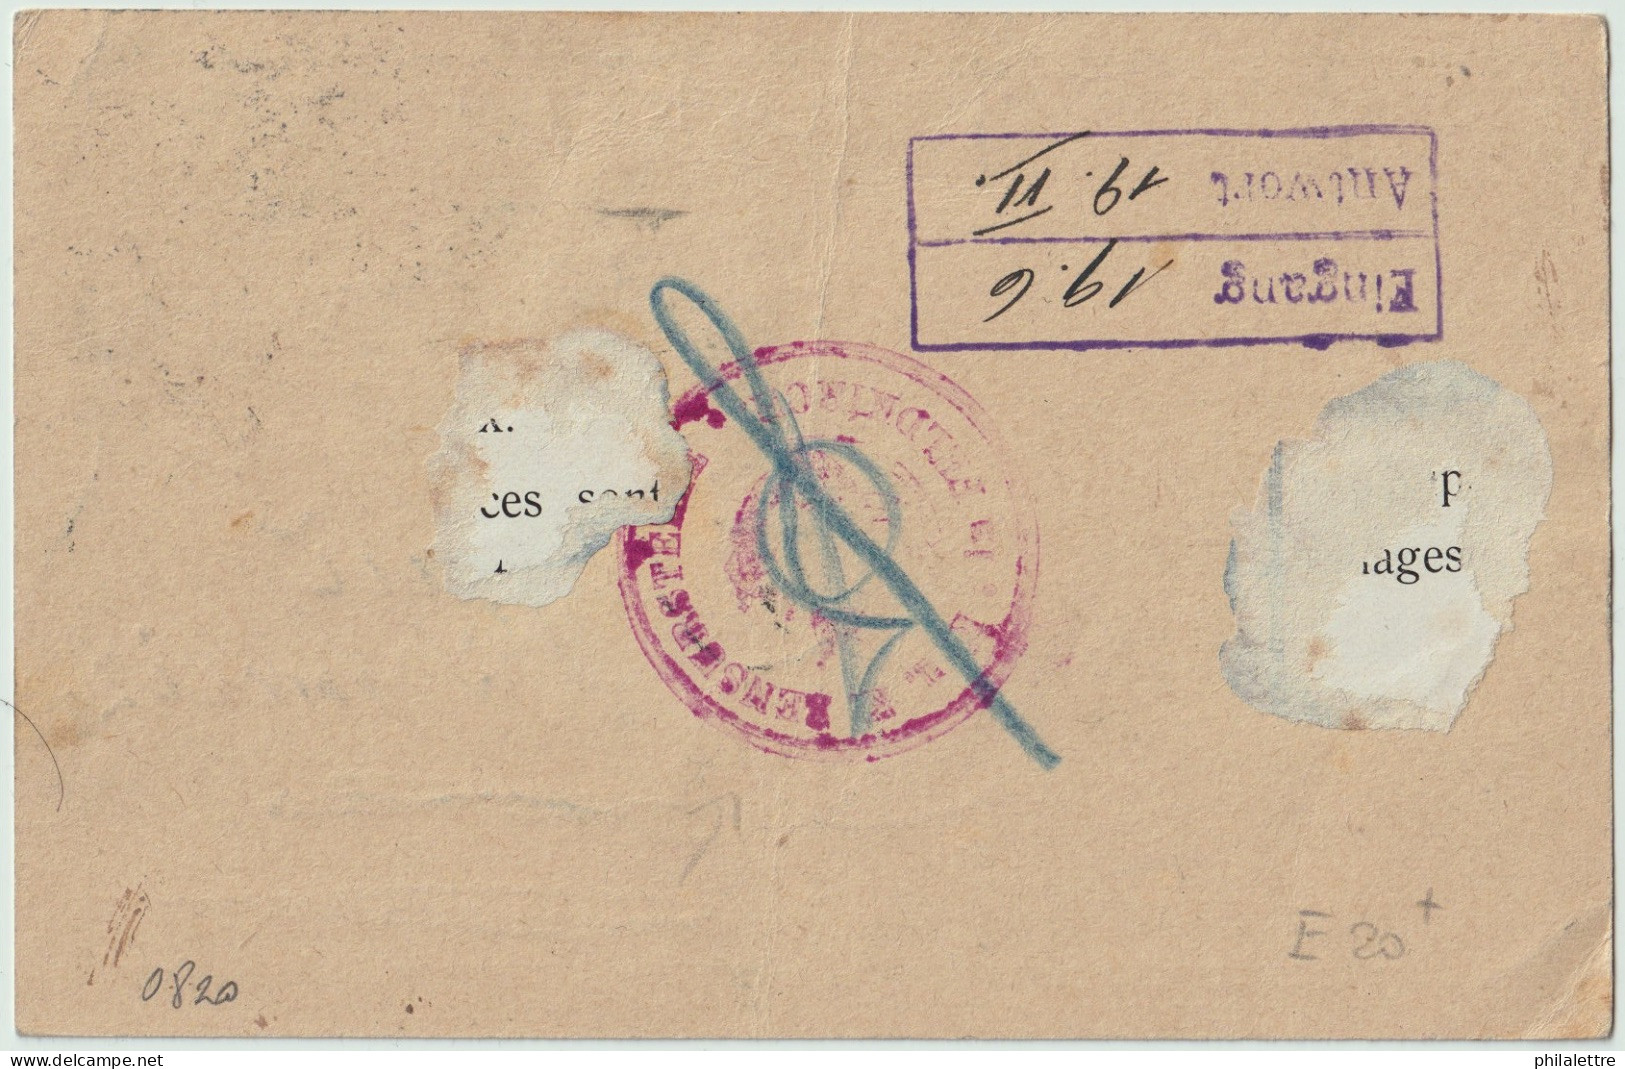 SUISSE / SWITZERLAND 1916 P. Due Mi.32 On 5h Austrian Domestic Postal Card From GRASLITZ To VIENNA, Re-directed To AARAU - Postage Due